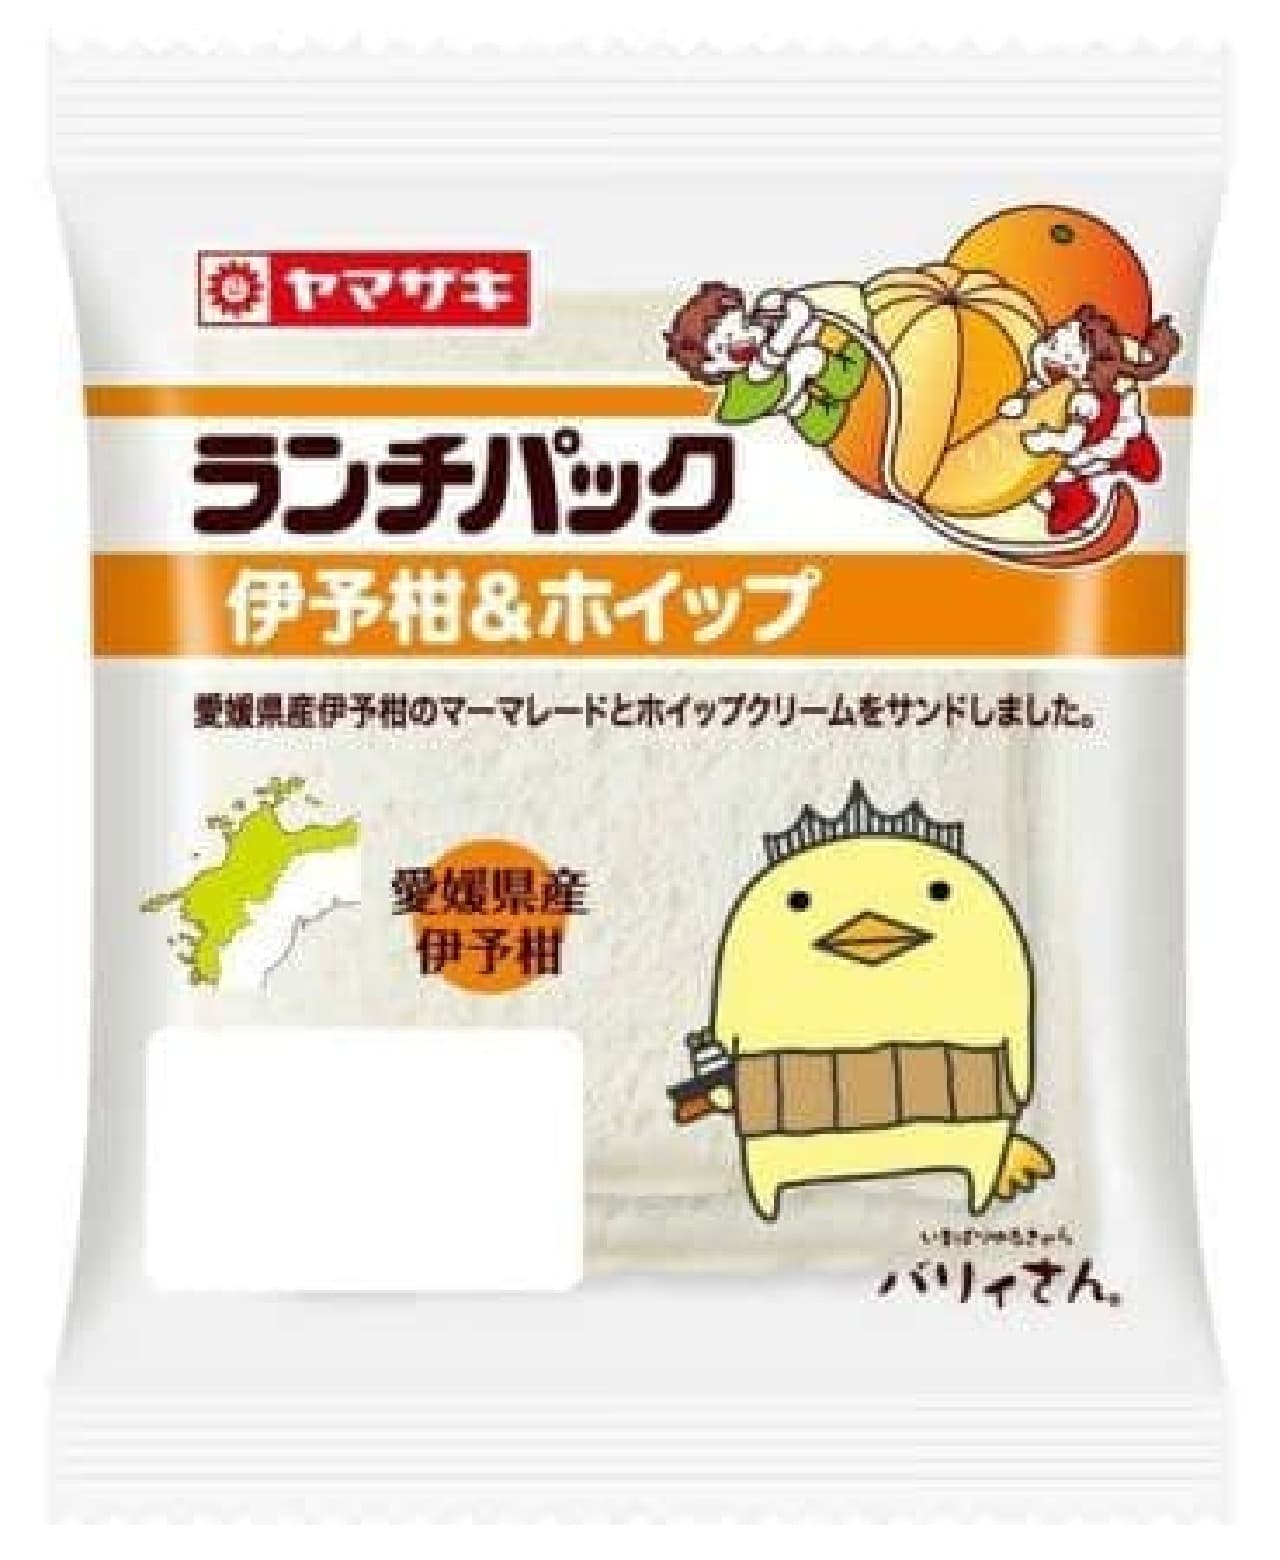 "Bali-san" on the package!